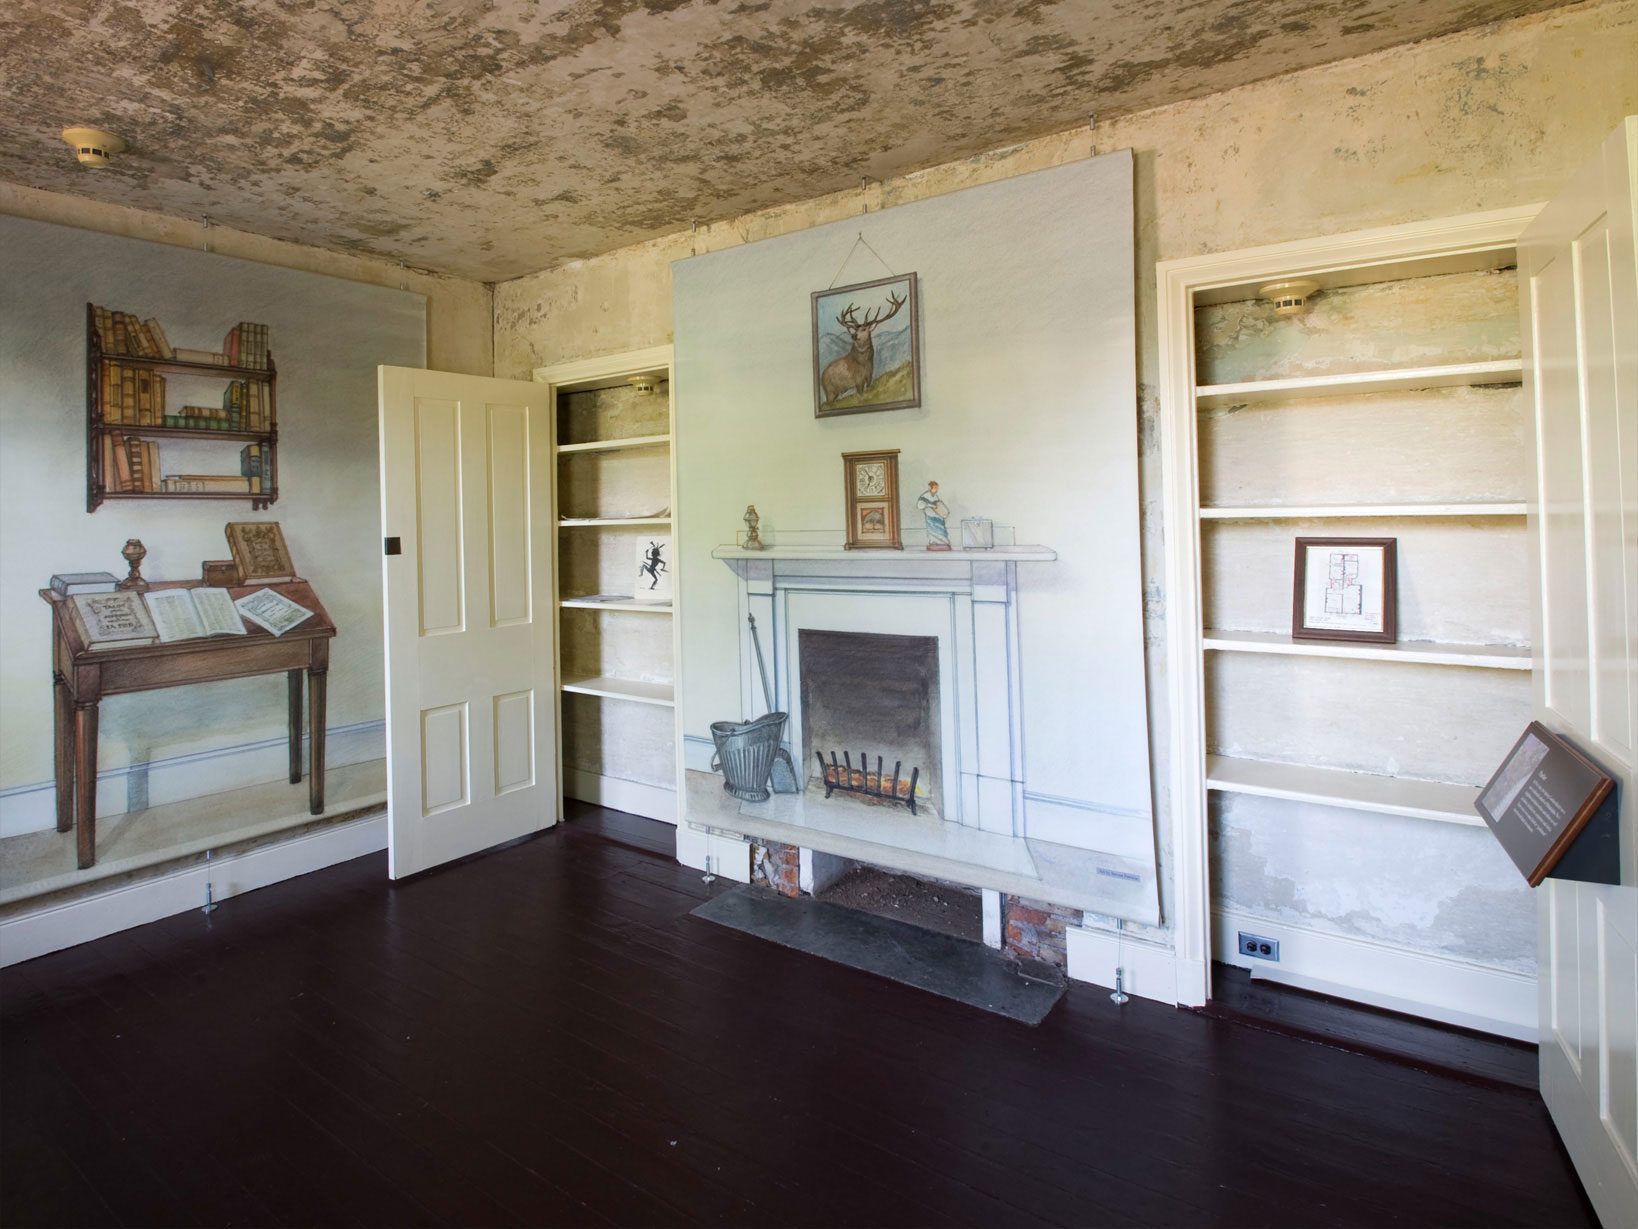 Color photo of the parlor in the Poe House showing illustrations of furniture on the walls.